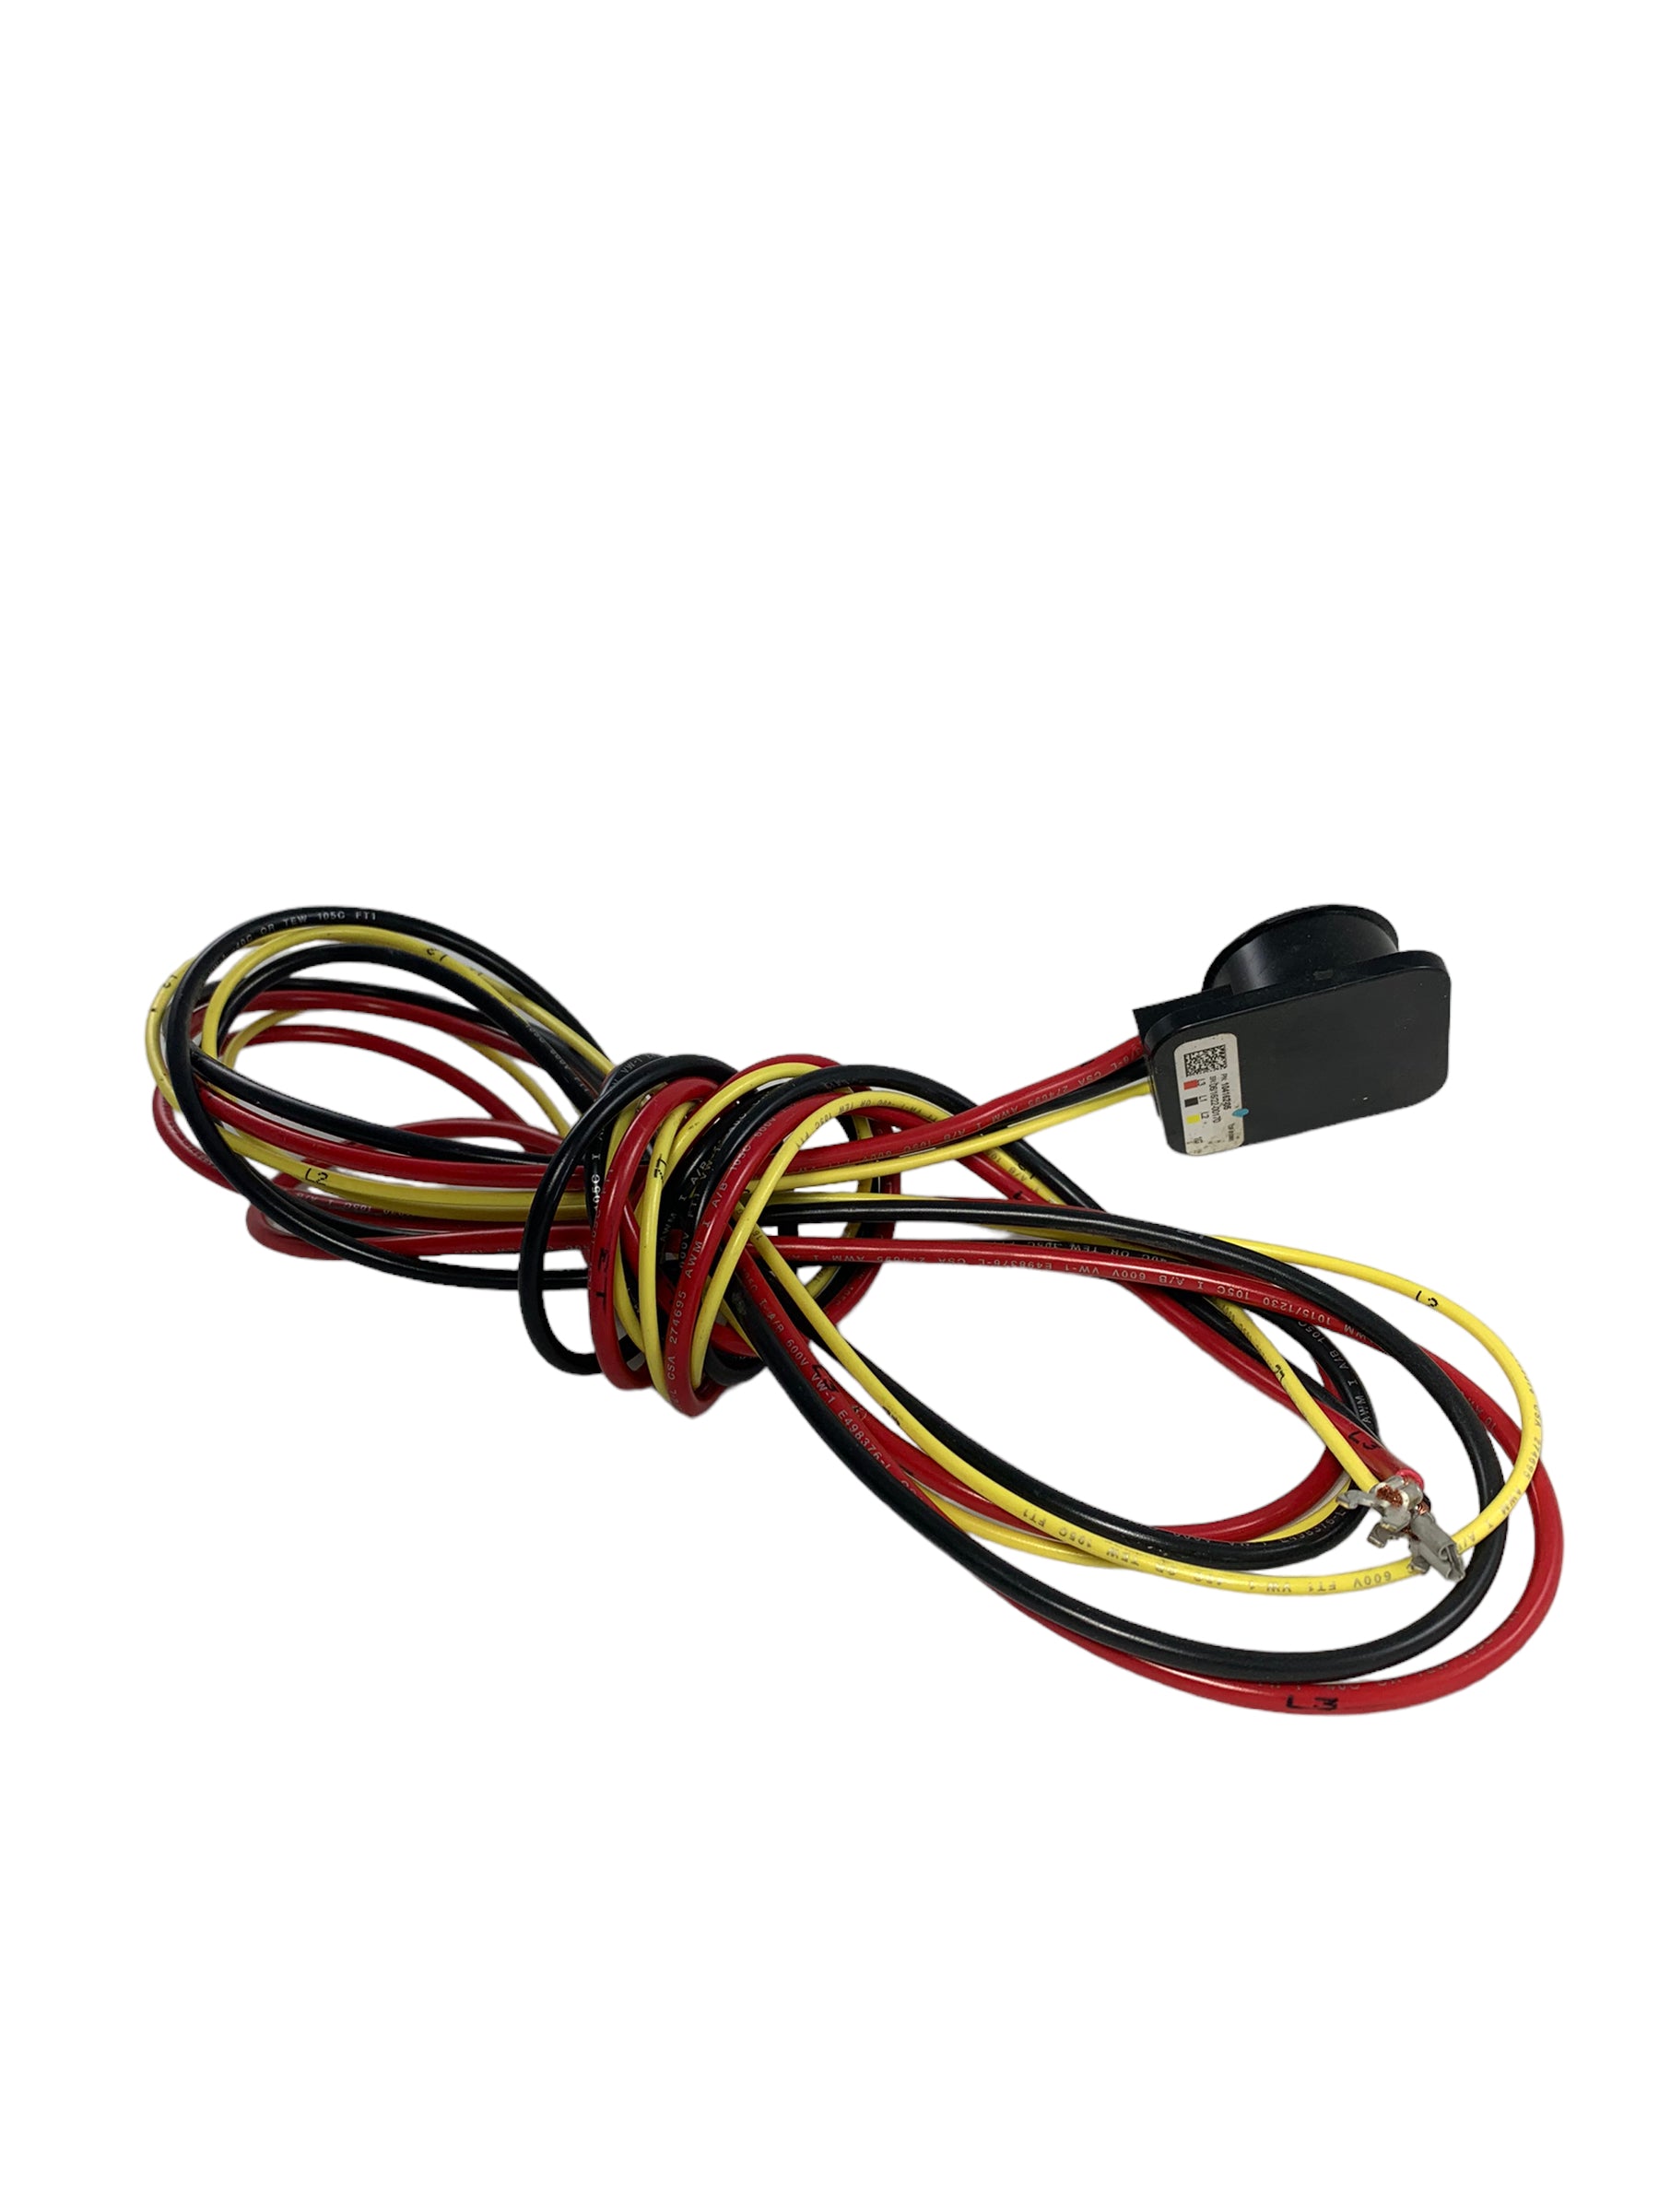 Lennox 104162-05, Compressor Plug Wiring Harness, 1-Phase, 102", 10/16/10 AWG Gauge, Black/Yellow/Red